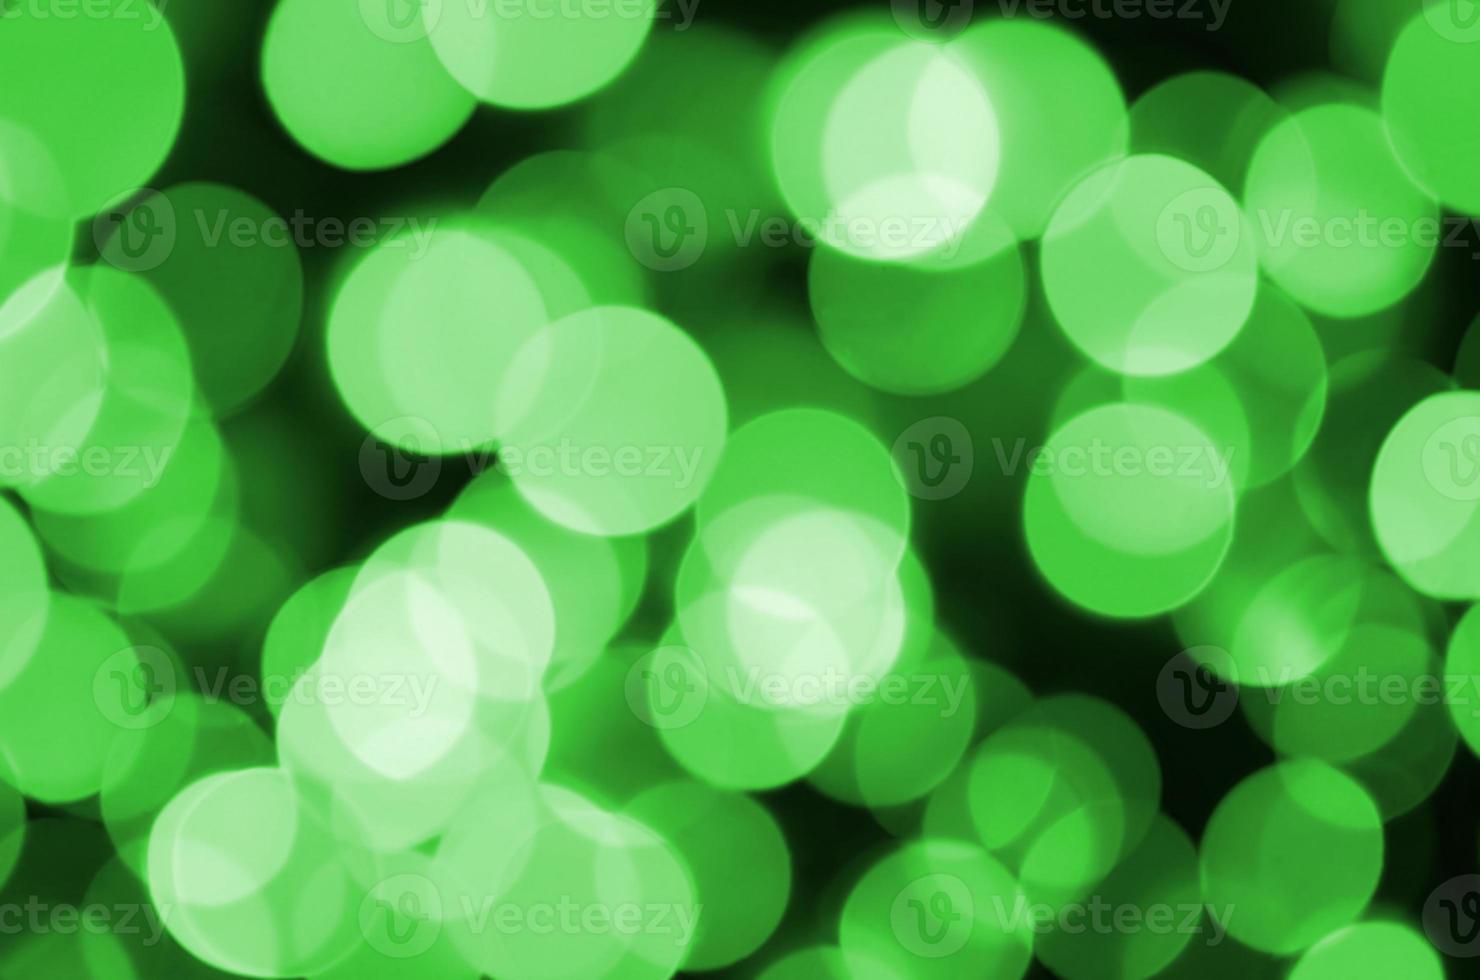 Green abstract Christmas blurred luminous background. Defocused artistic bokeh lights image photo